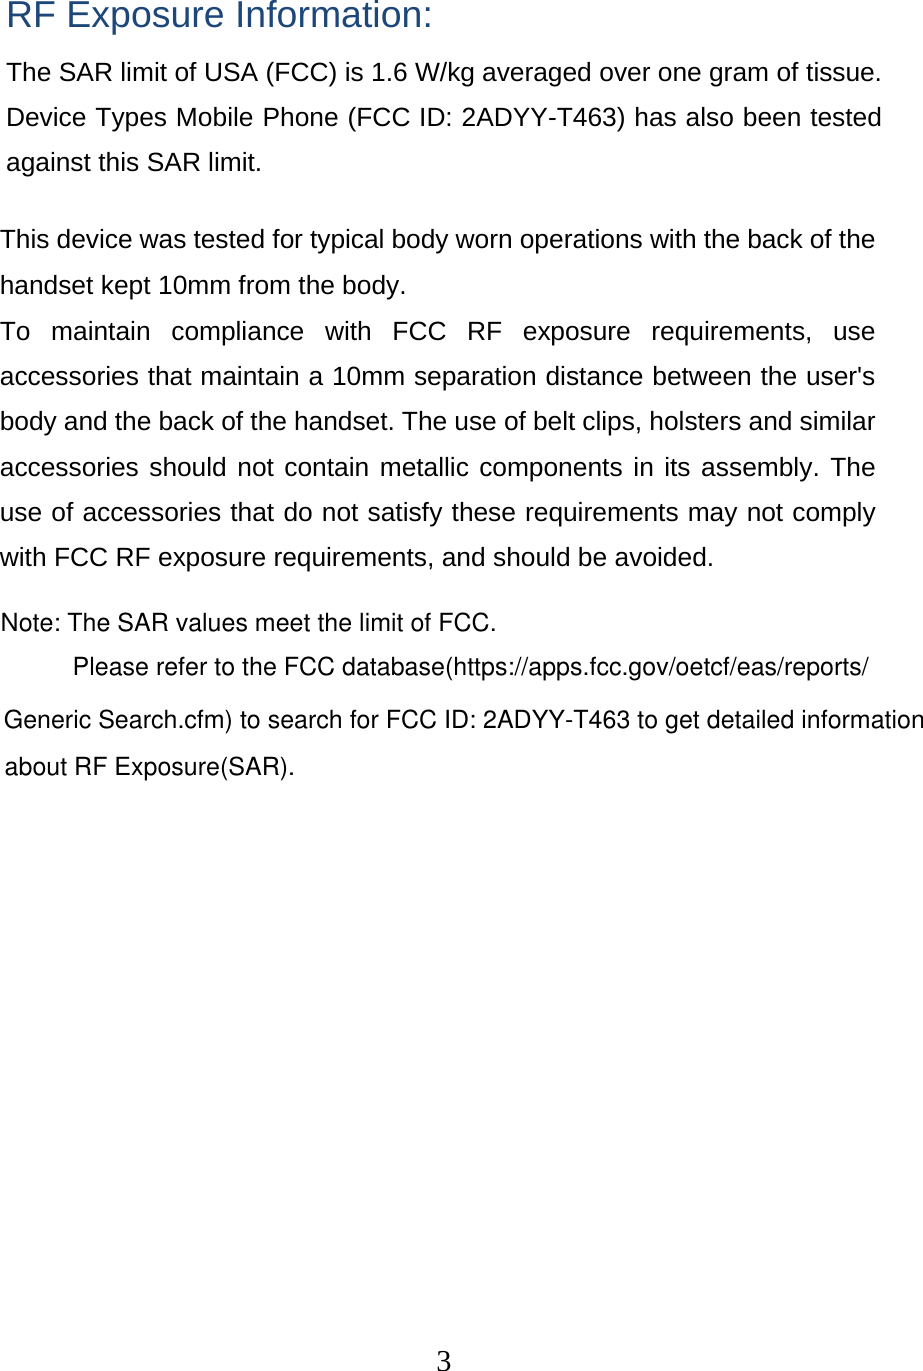  3 RF Exposure Information: The SAR limit of USA (FCC) is 1.6 W/kg averaged over one gram of tissue. Device Types Mobile Phone (FCC ID: 2ADYY-T463) has also been tested against this SAR limit. This device was tested for typical body worn operations with the back of the handset kept 10mm from the body. To maintain compliance with FCC RF exposure requirements, use accessories that maintain a 10mm separation distance between the user&apos;s body and the back of the handset. The use of belt clips, holsters and similar accessories should not contain metallic components in its assembly. The use of accessories that do not satisfy these requirements may not comply with FCC RF exposure requirements, and should be avoided. Note: The SAR values meet the limit of FCC.Please refer to the FCC database(https://apps.fcc.gov/oetcf/eas/reports/Generic Search.cfm) to search for FCC ID: 2ADYY-T463 to get detailed informationabout RF Exposure(SAR).